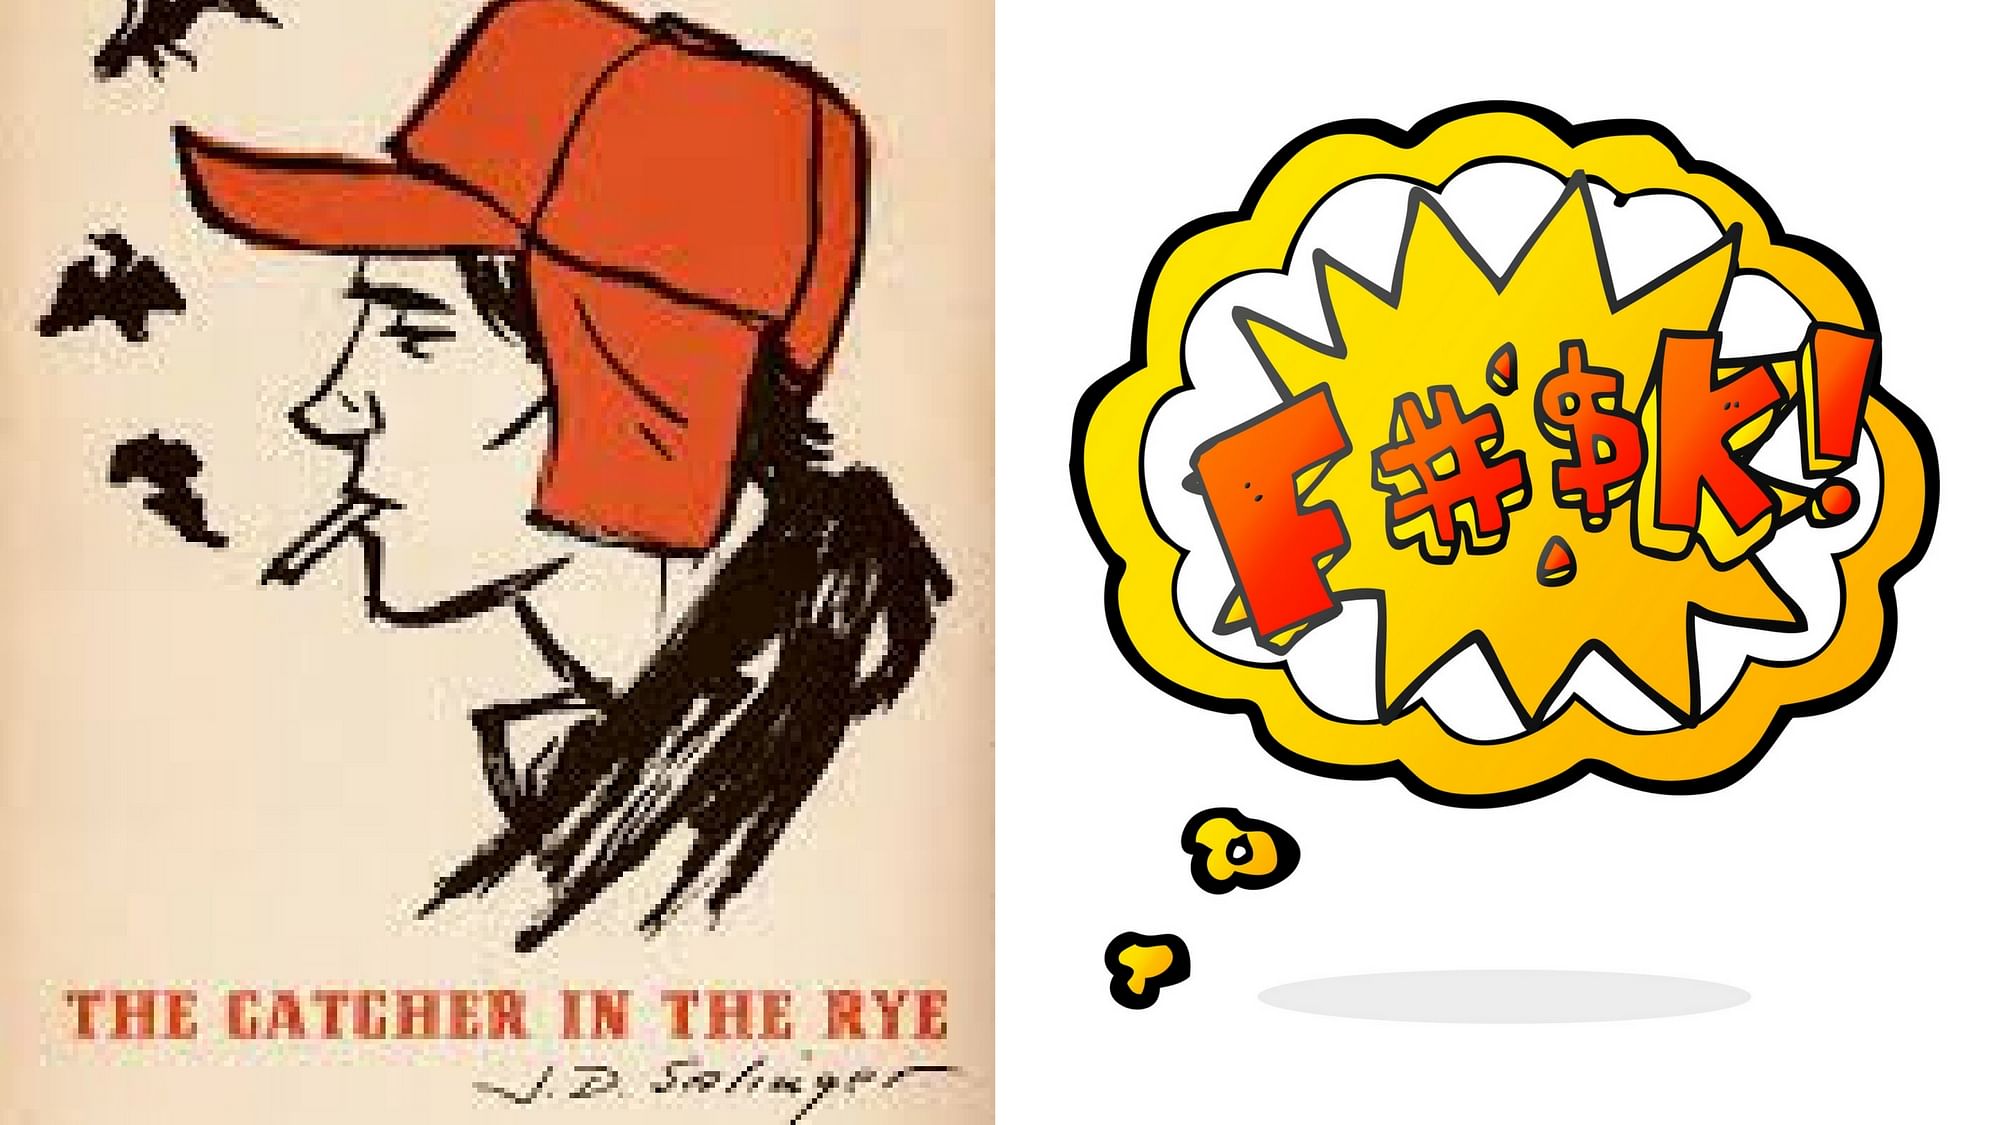 Sixty-five years later, we still don't get 'The Catcher in the Rye' and  Holden